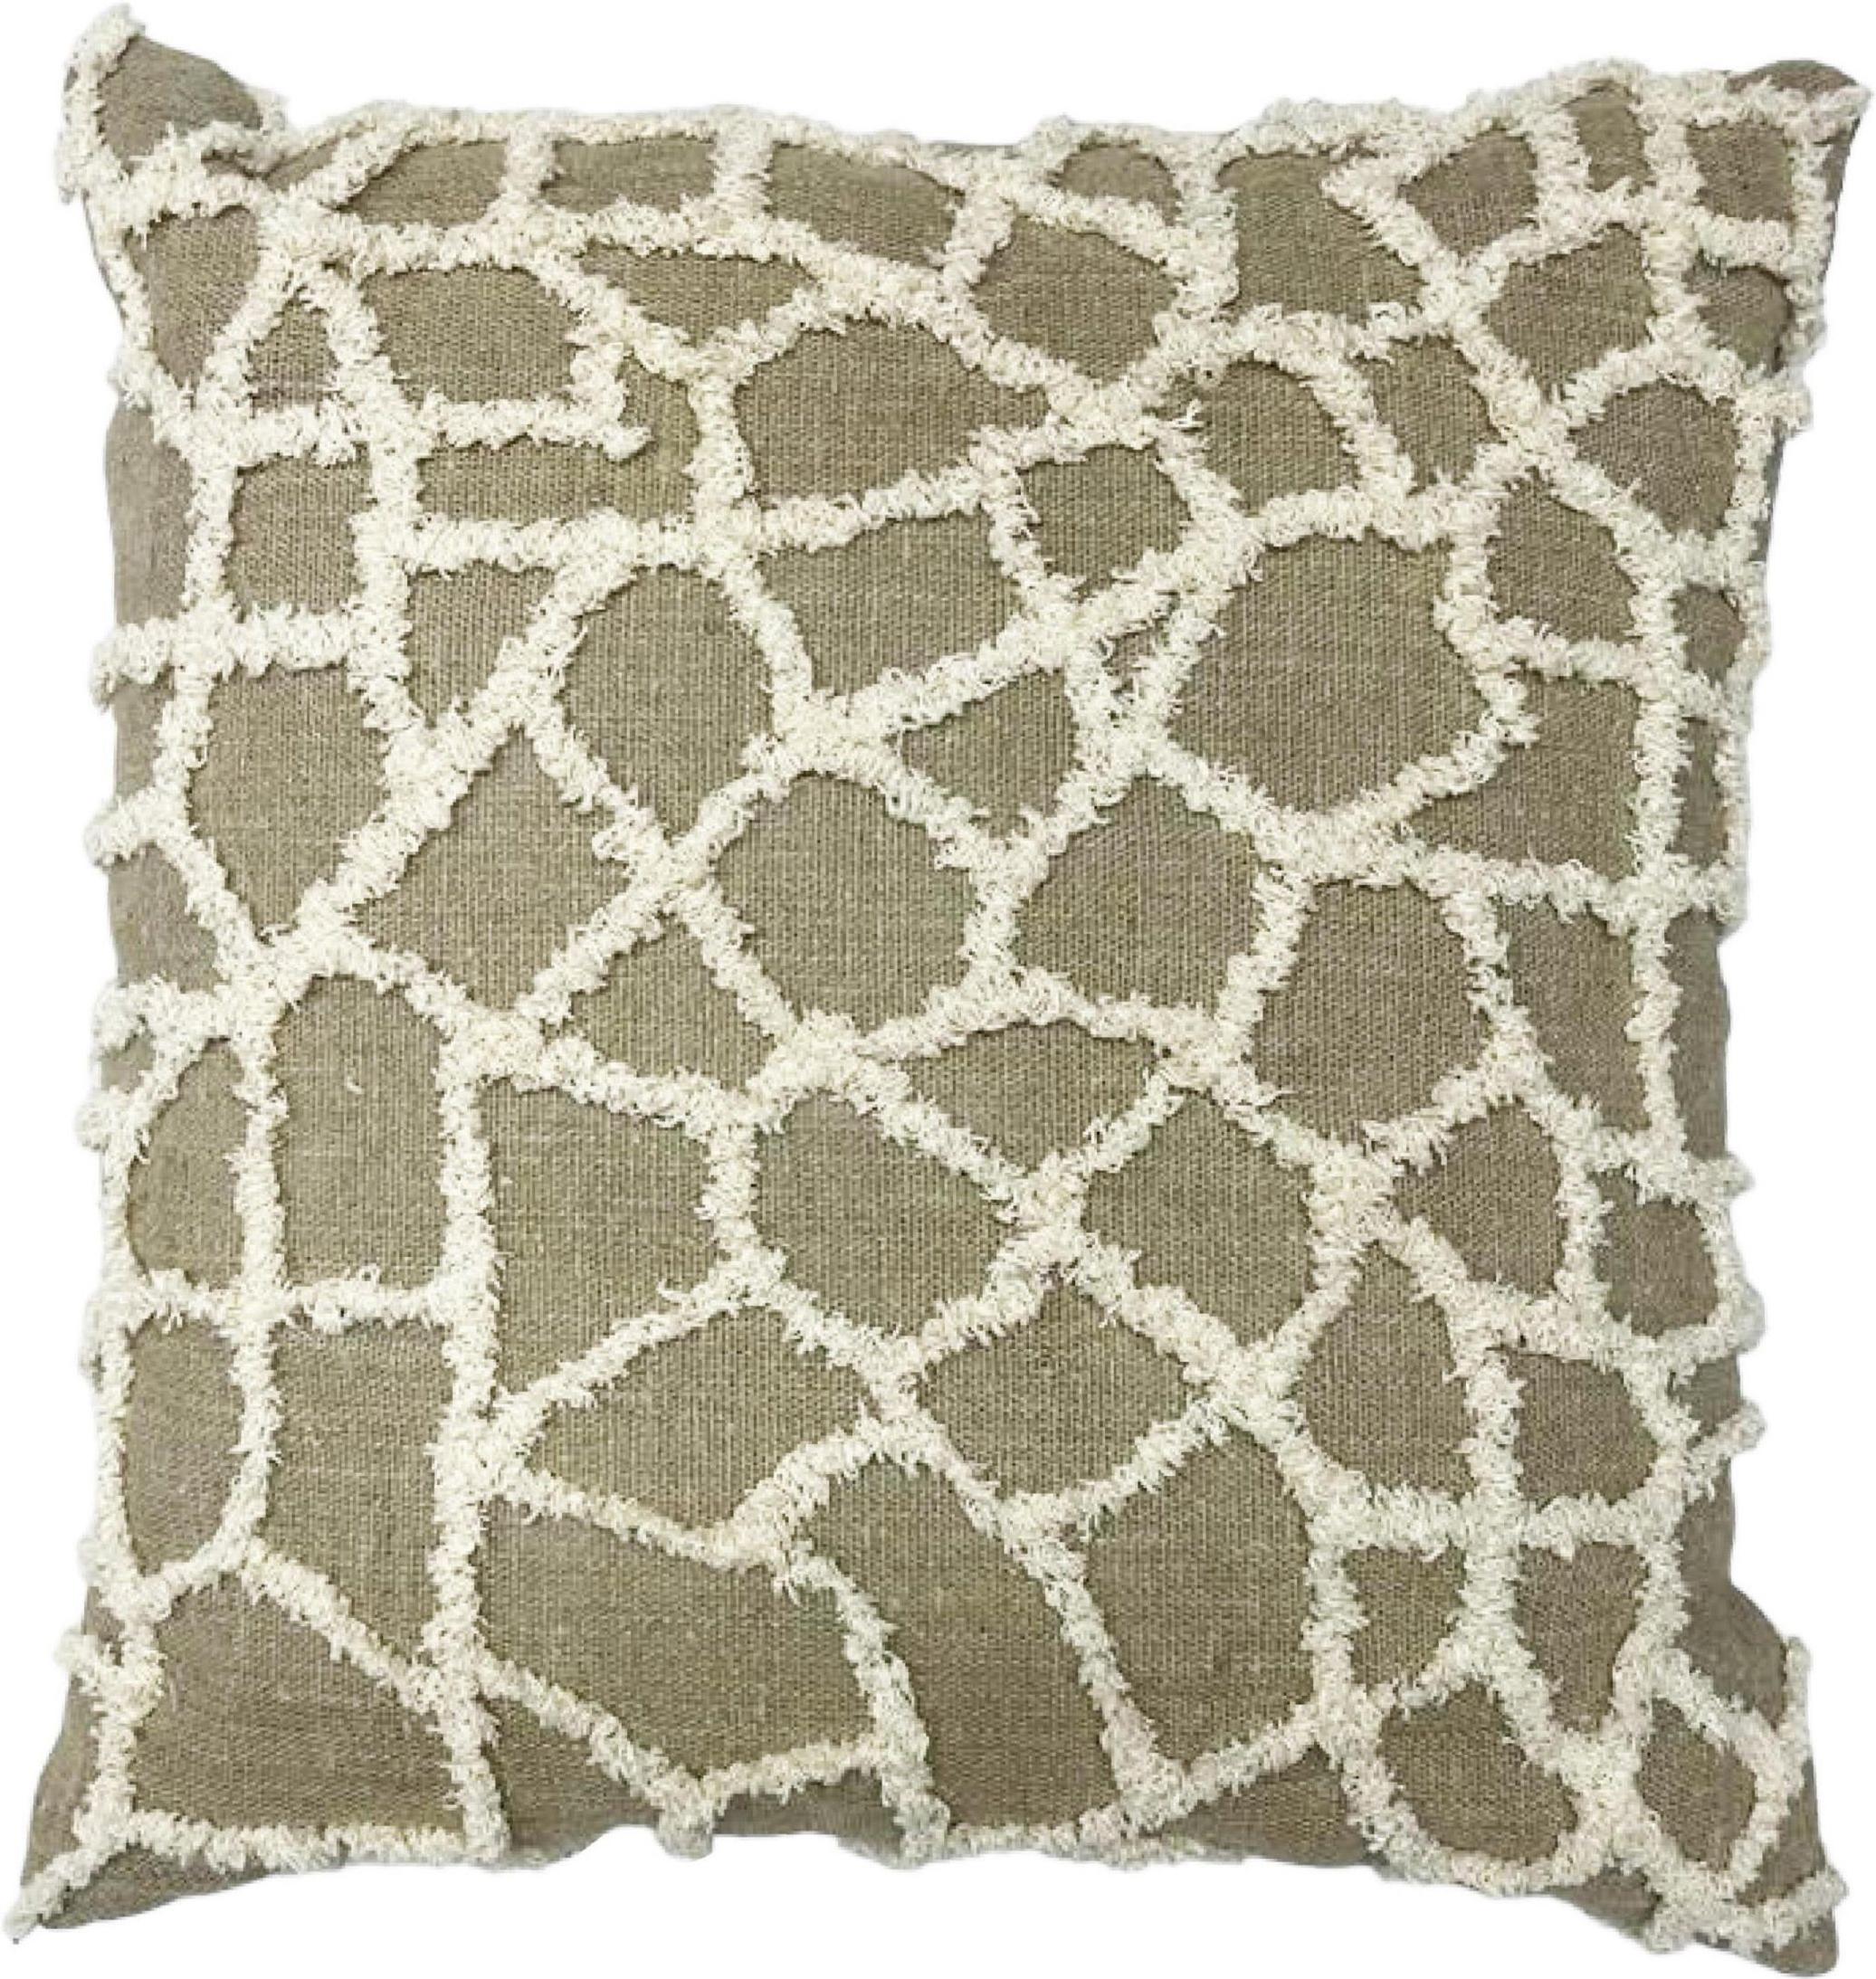 Hand-Knotted Boho Chic Style Modern Wool and Cotton Pillow In Taupe Color For Sale